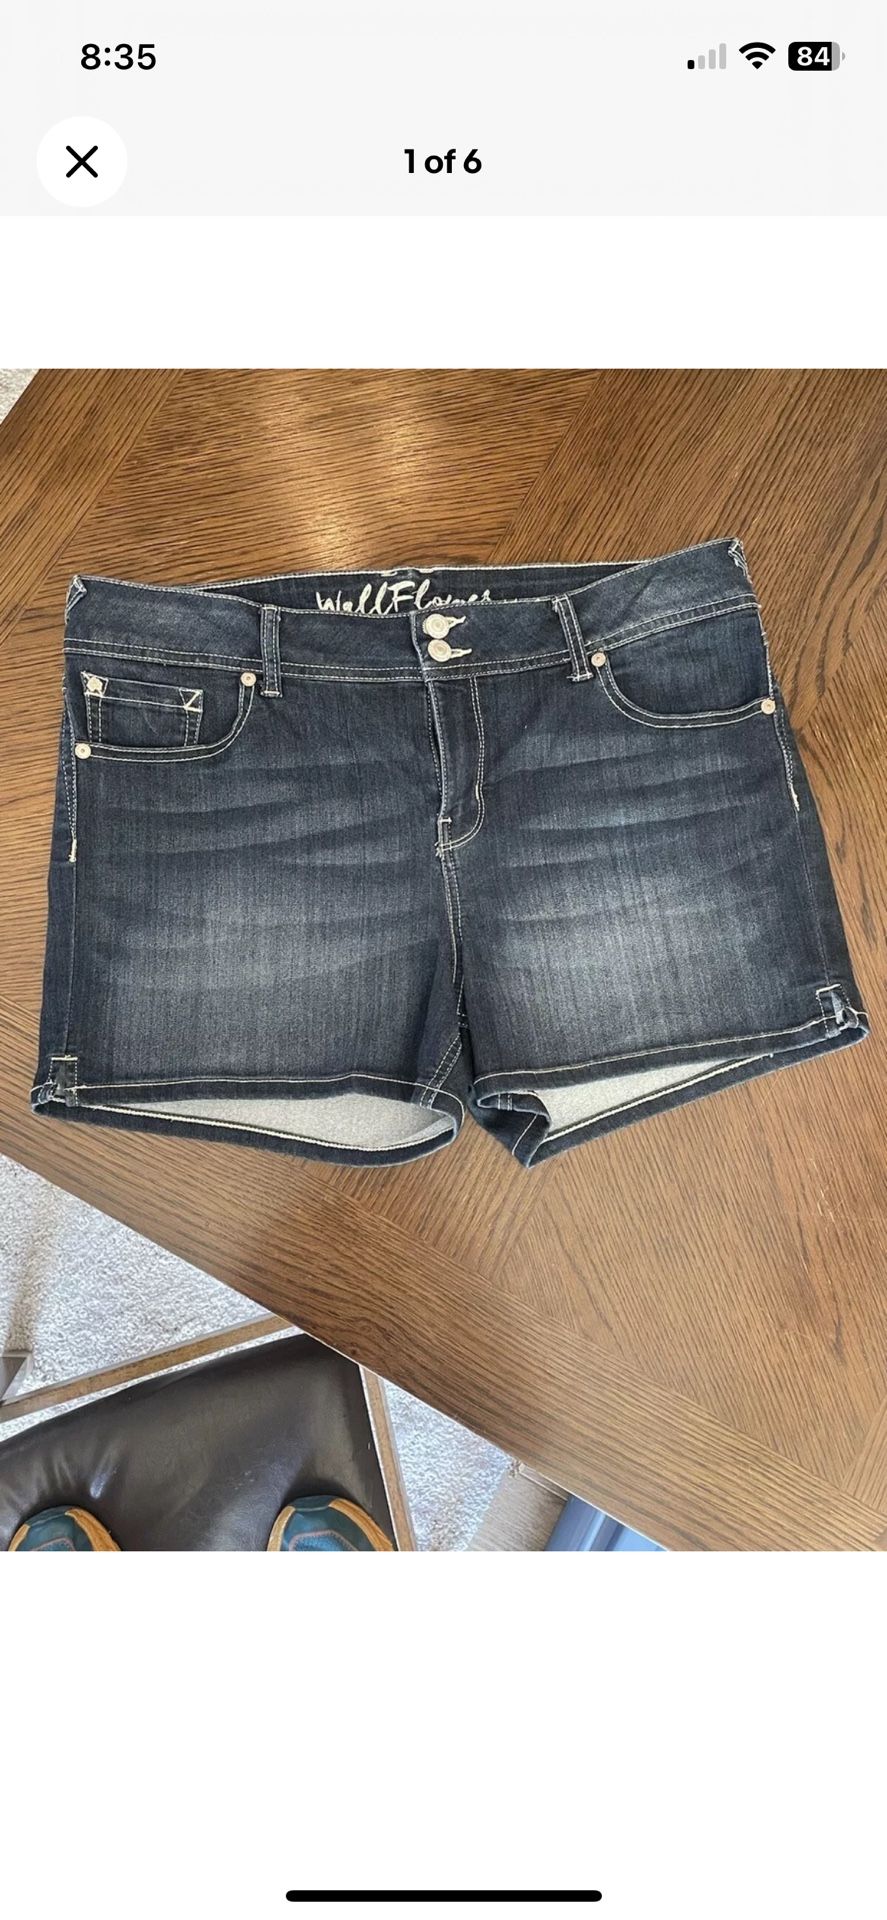 WallFlower Jean Shorts NEW without tags Juniors Size 17 